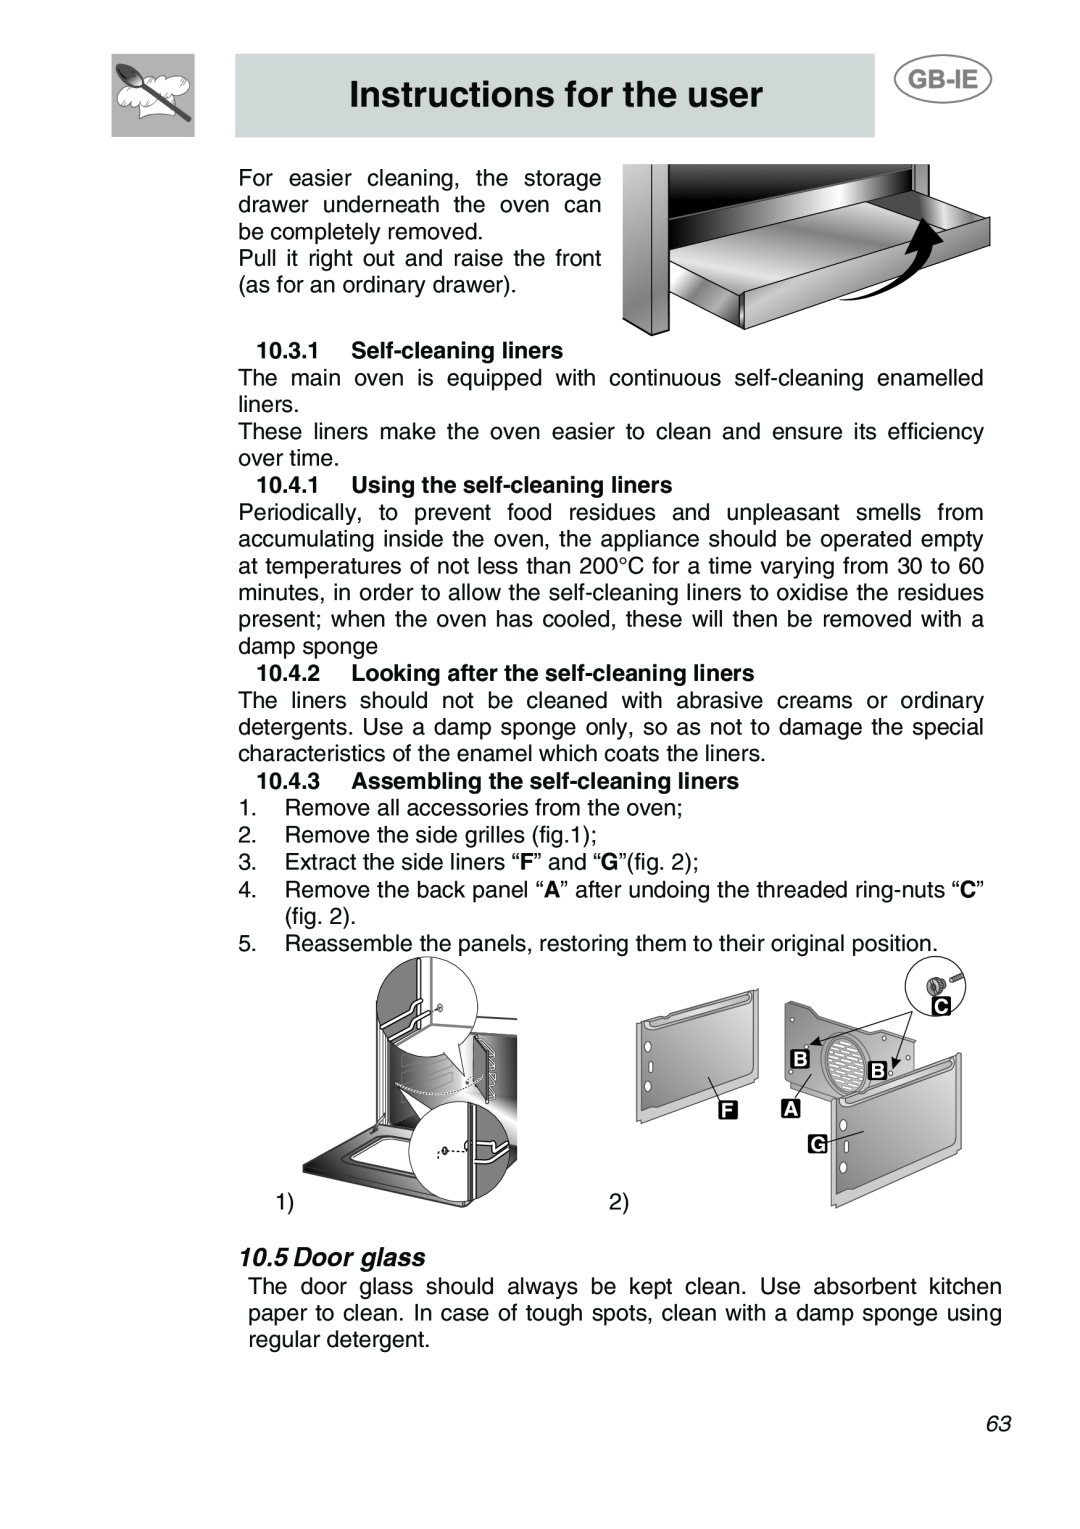 Smeg A1-6 manual Door glass, Instructions for the user, Self-cleaning liners, Using the self-cleaning liners 